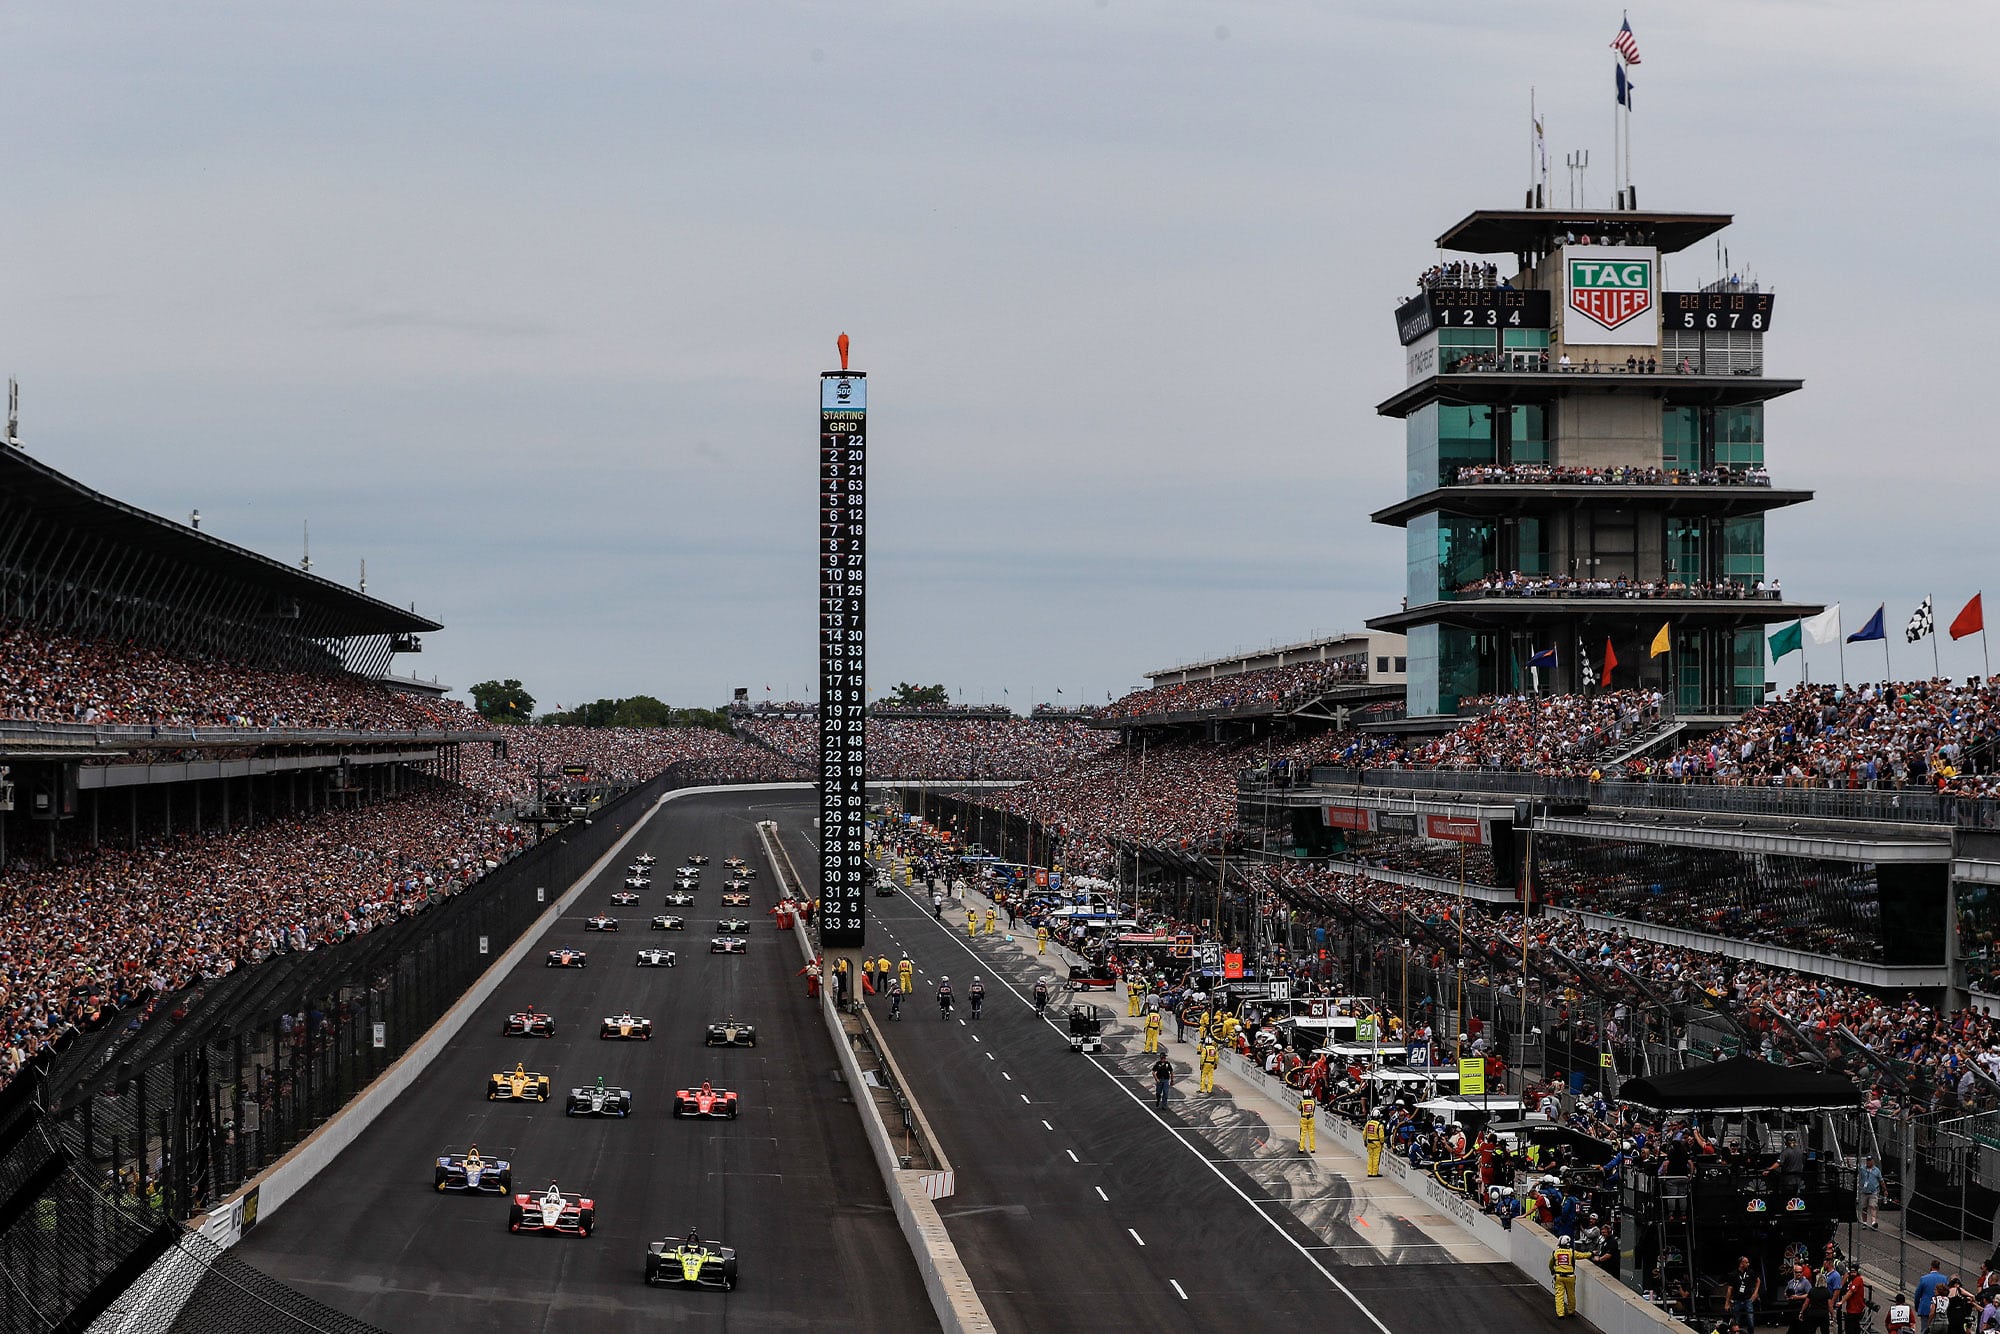 The start of the 2019 Indy 500